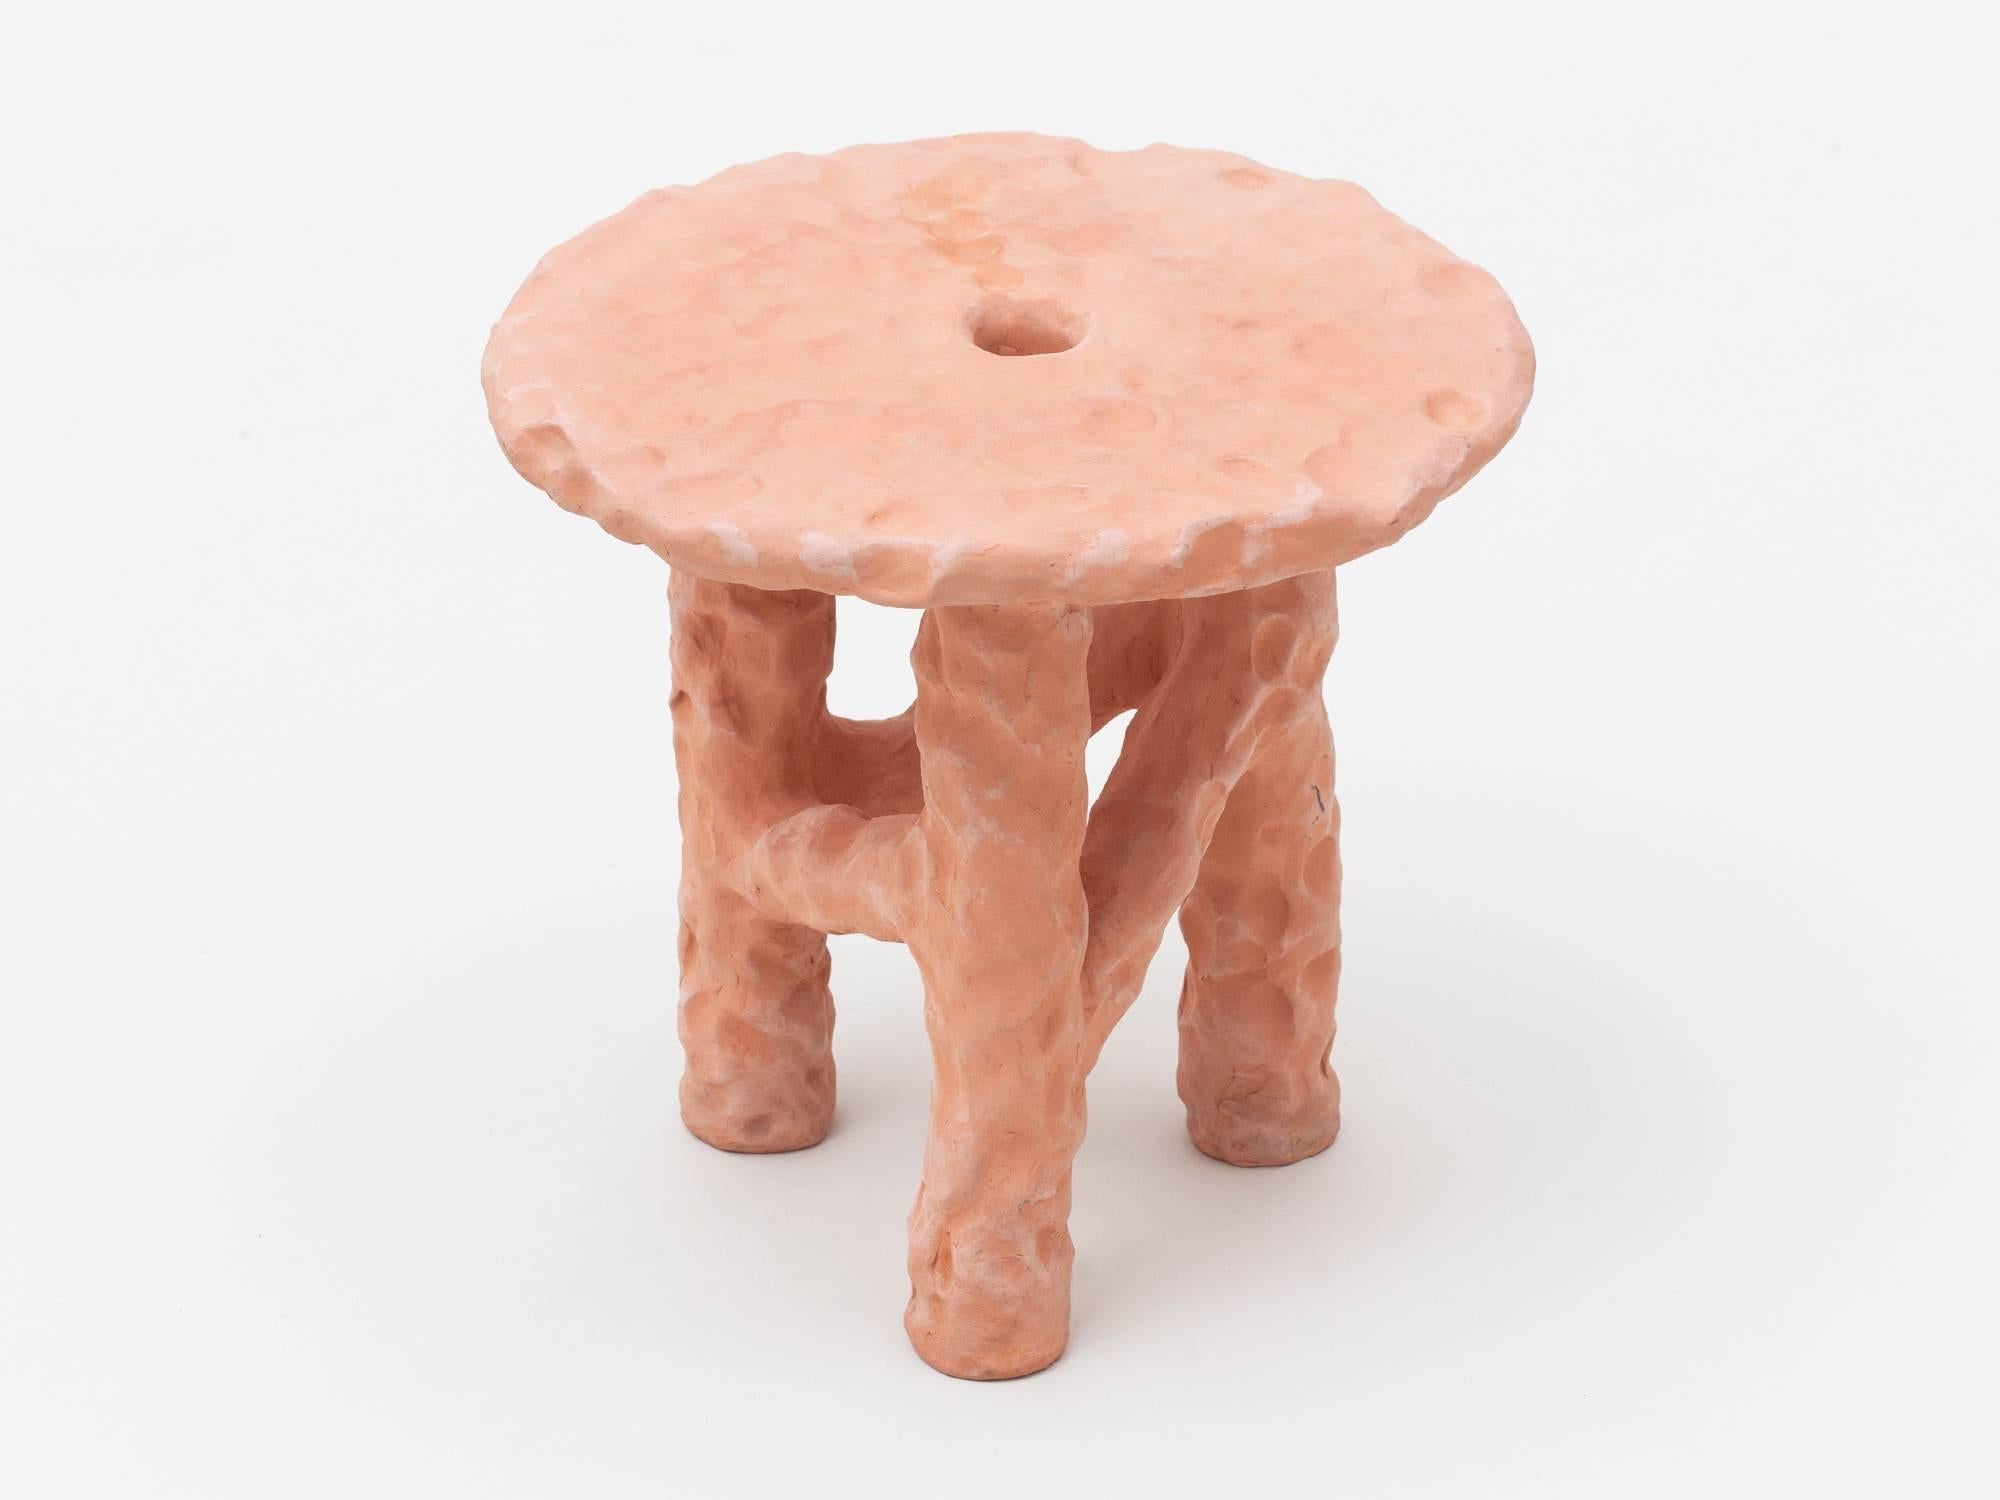 Handmade terracotta side table by New York based artist Chris Wolston. Can be used indoors or outdoors. Each table is unique. Custom works available.